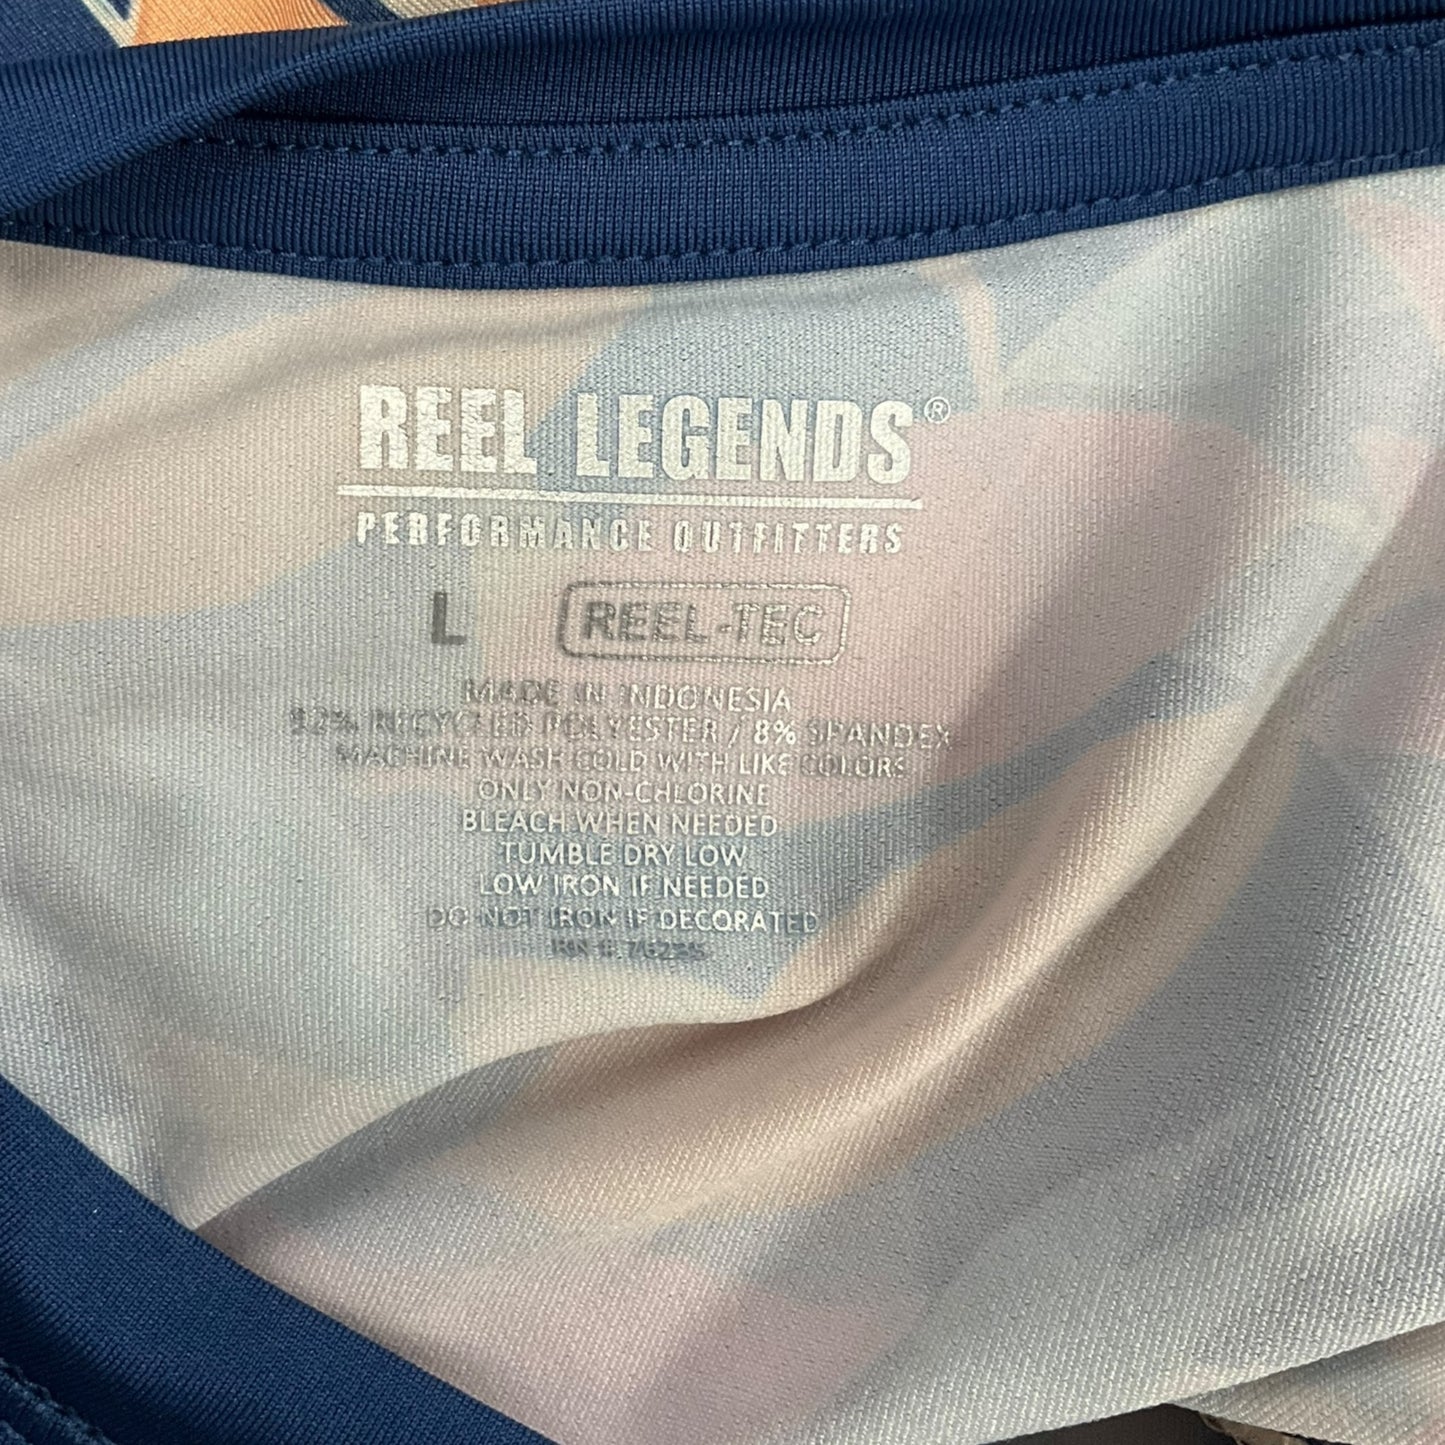 Athletic Top Long Sleeve Crewneck By Reel Legends  Size: L